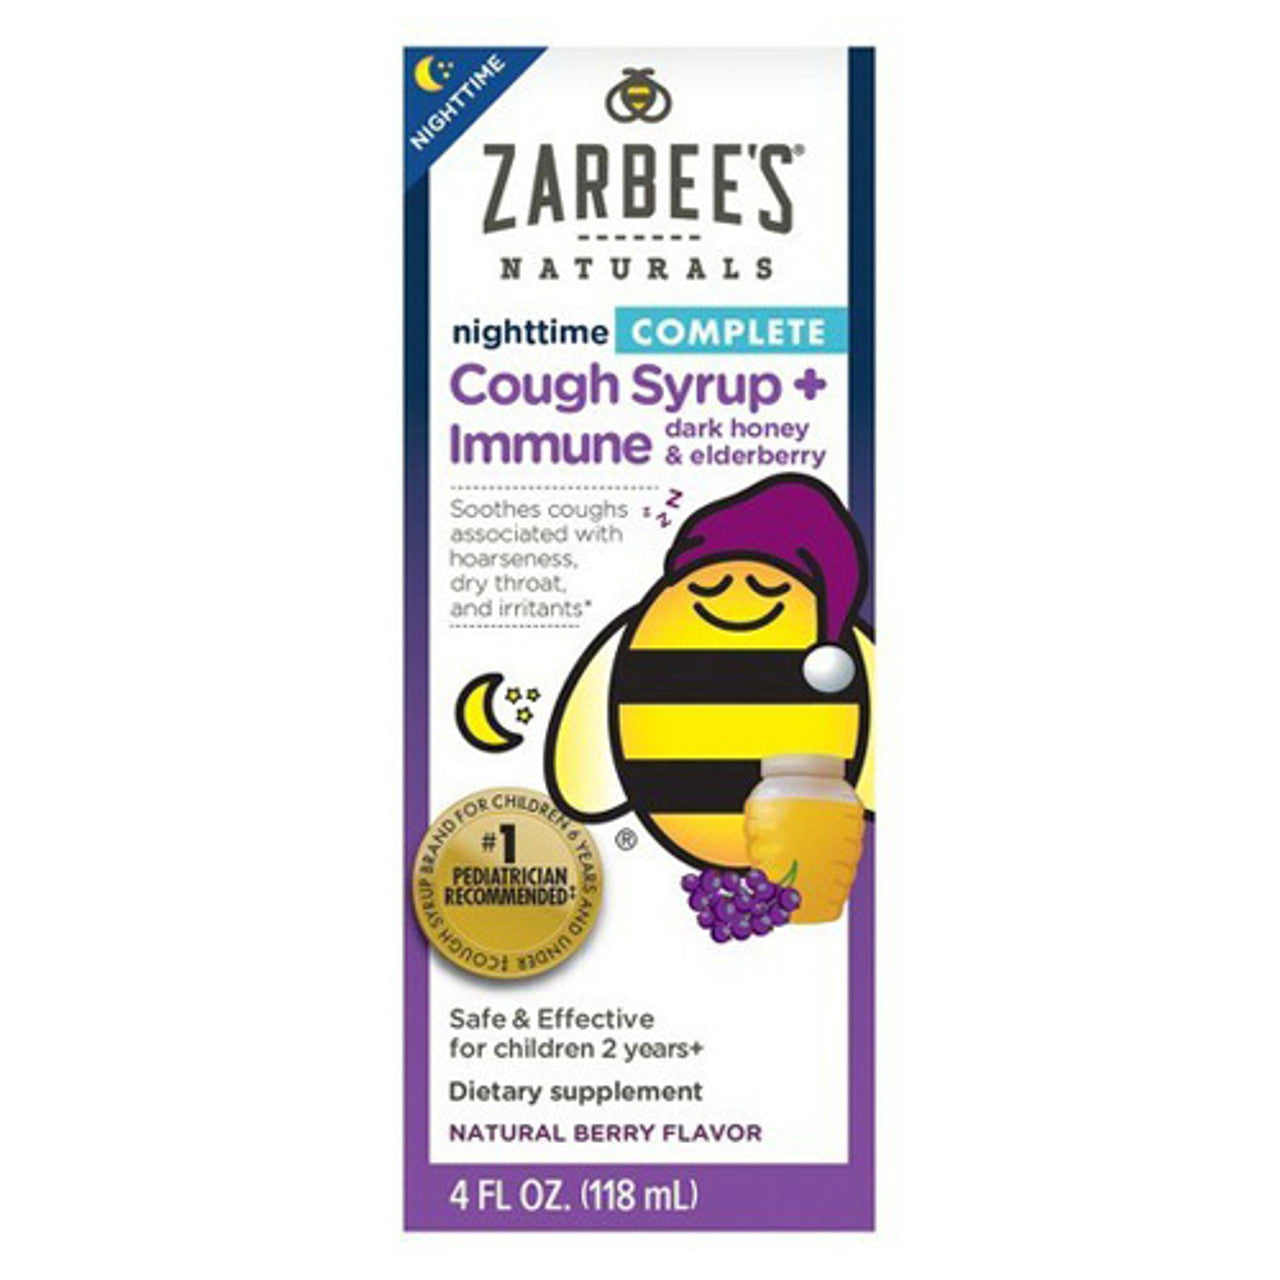 Zarbees Naturals Childrens Complete Nighttime Cough Syrup Plus Immune, Berry, 4 Oz